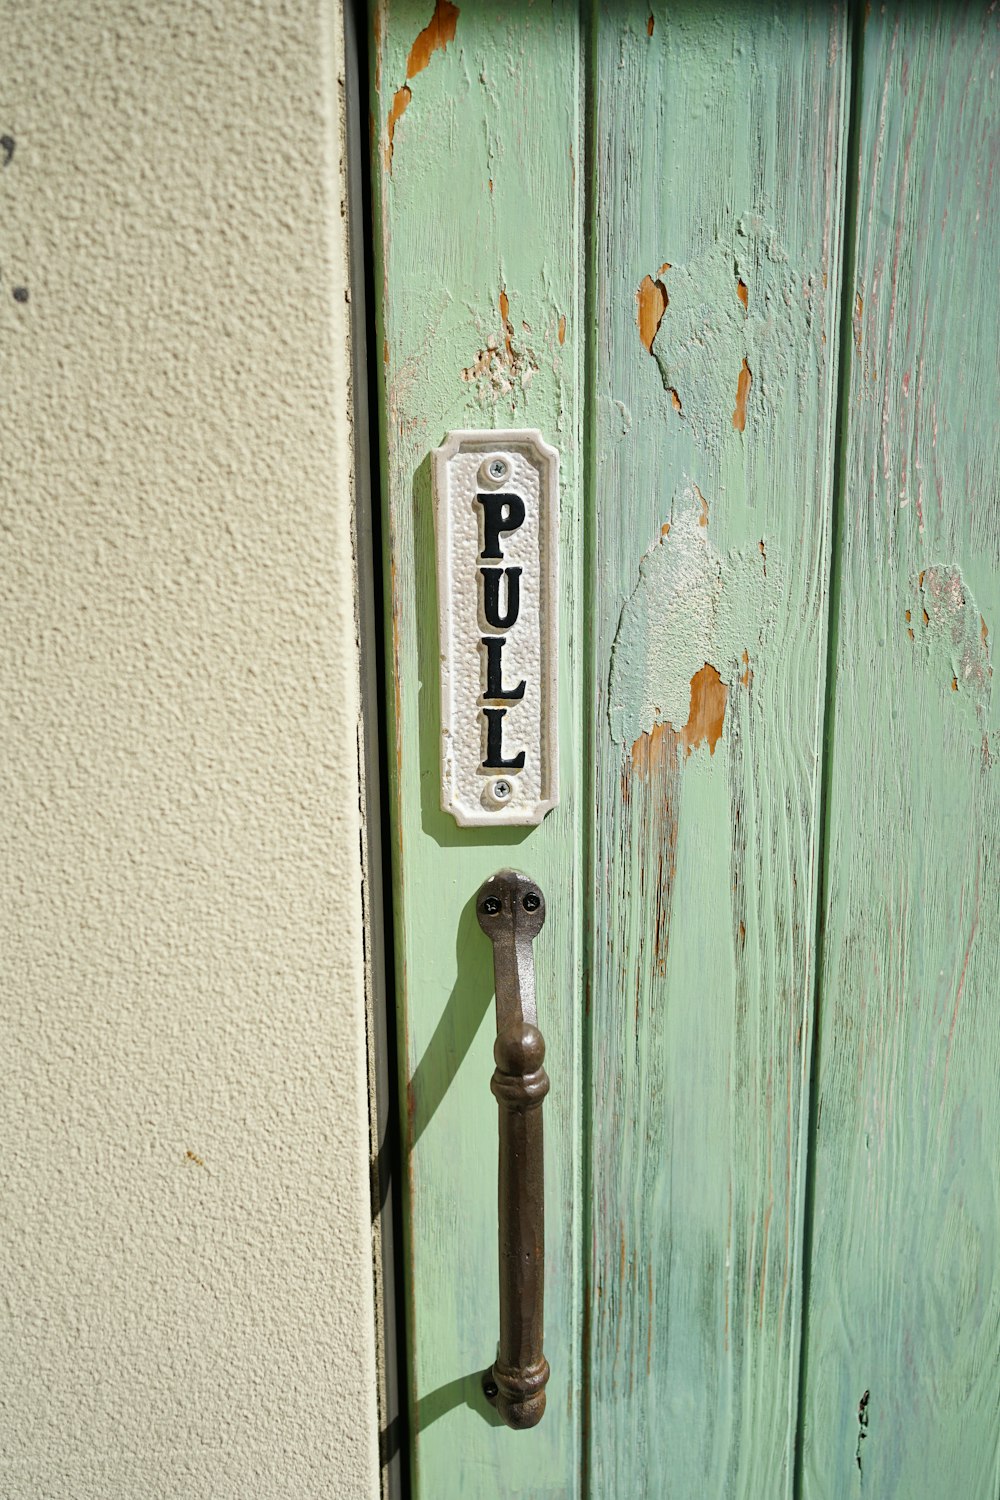 a door handle on a green door with a push button